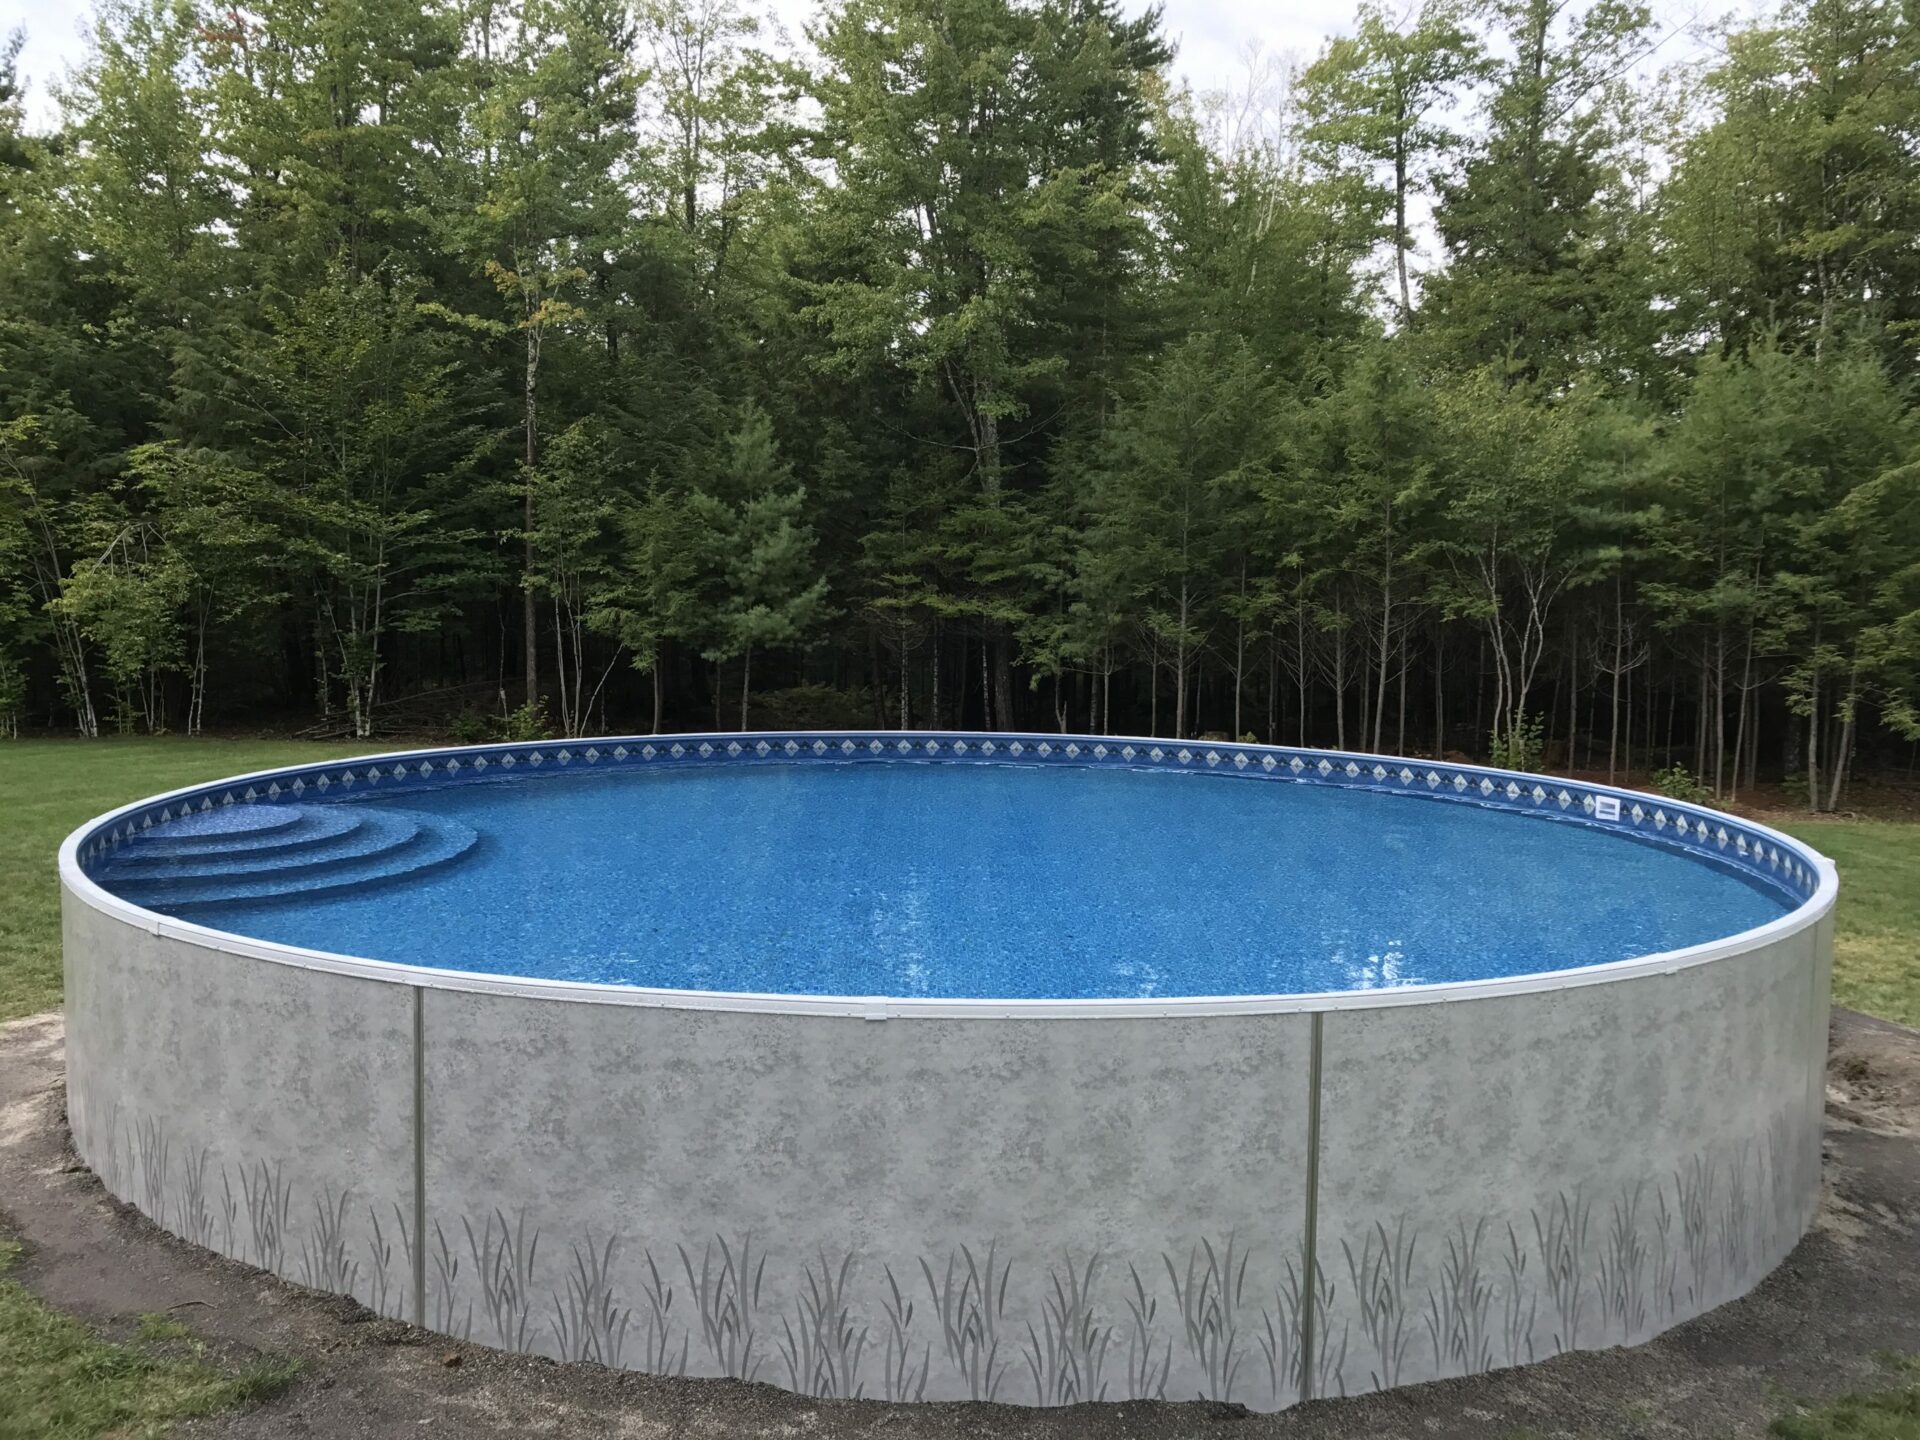 Get an above ground pool the whole family will enjoy!